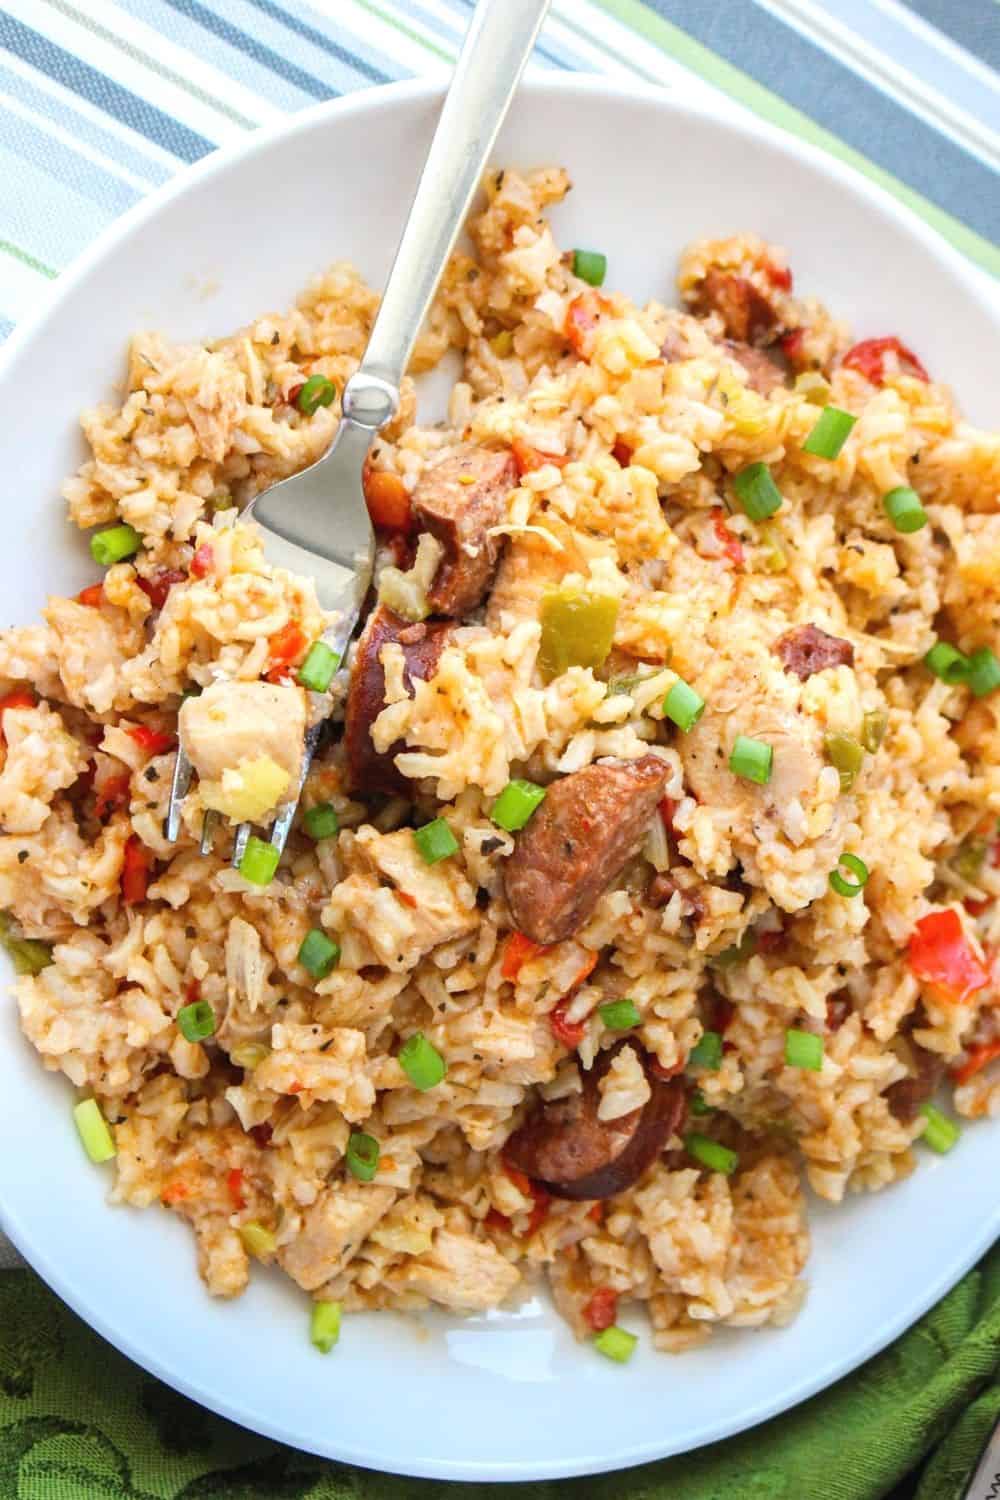 Instant Pot jambalaya made with chicken and sausage, served on a white plate with a fork in it